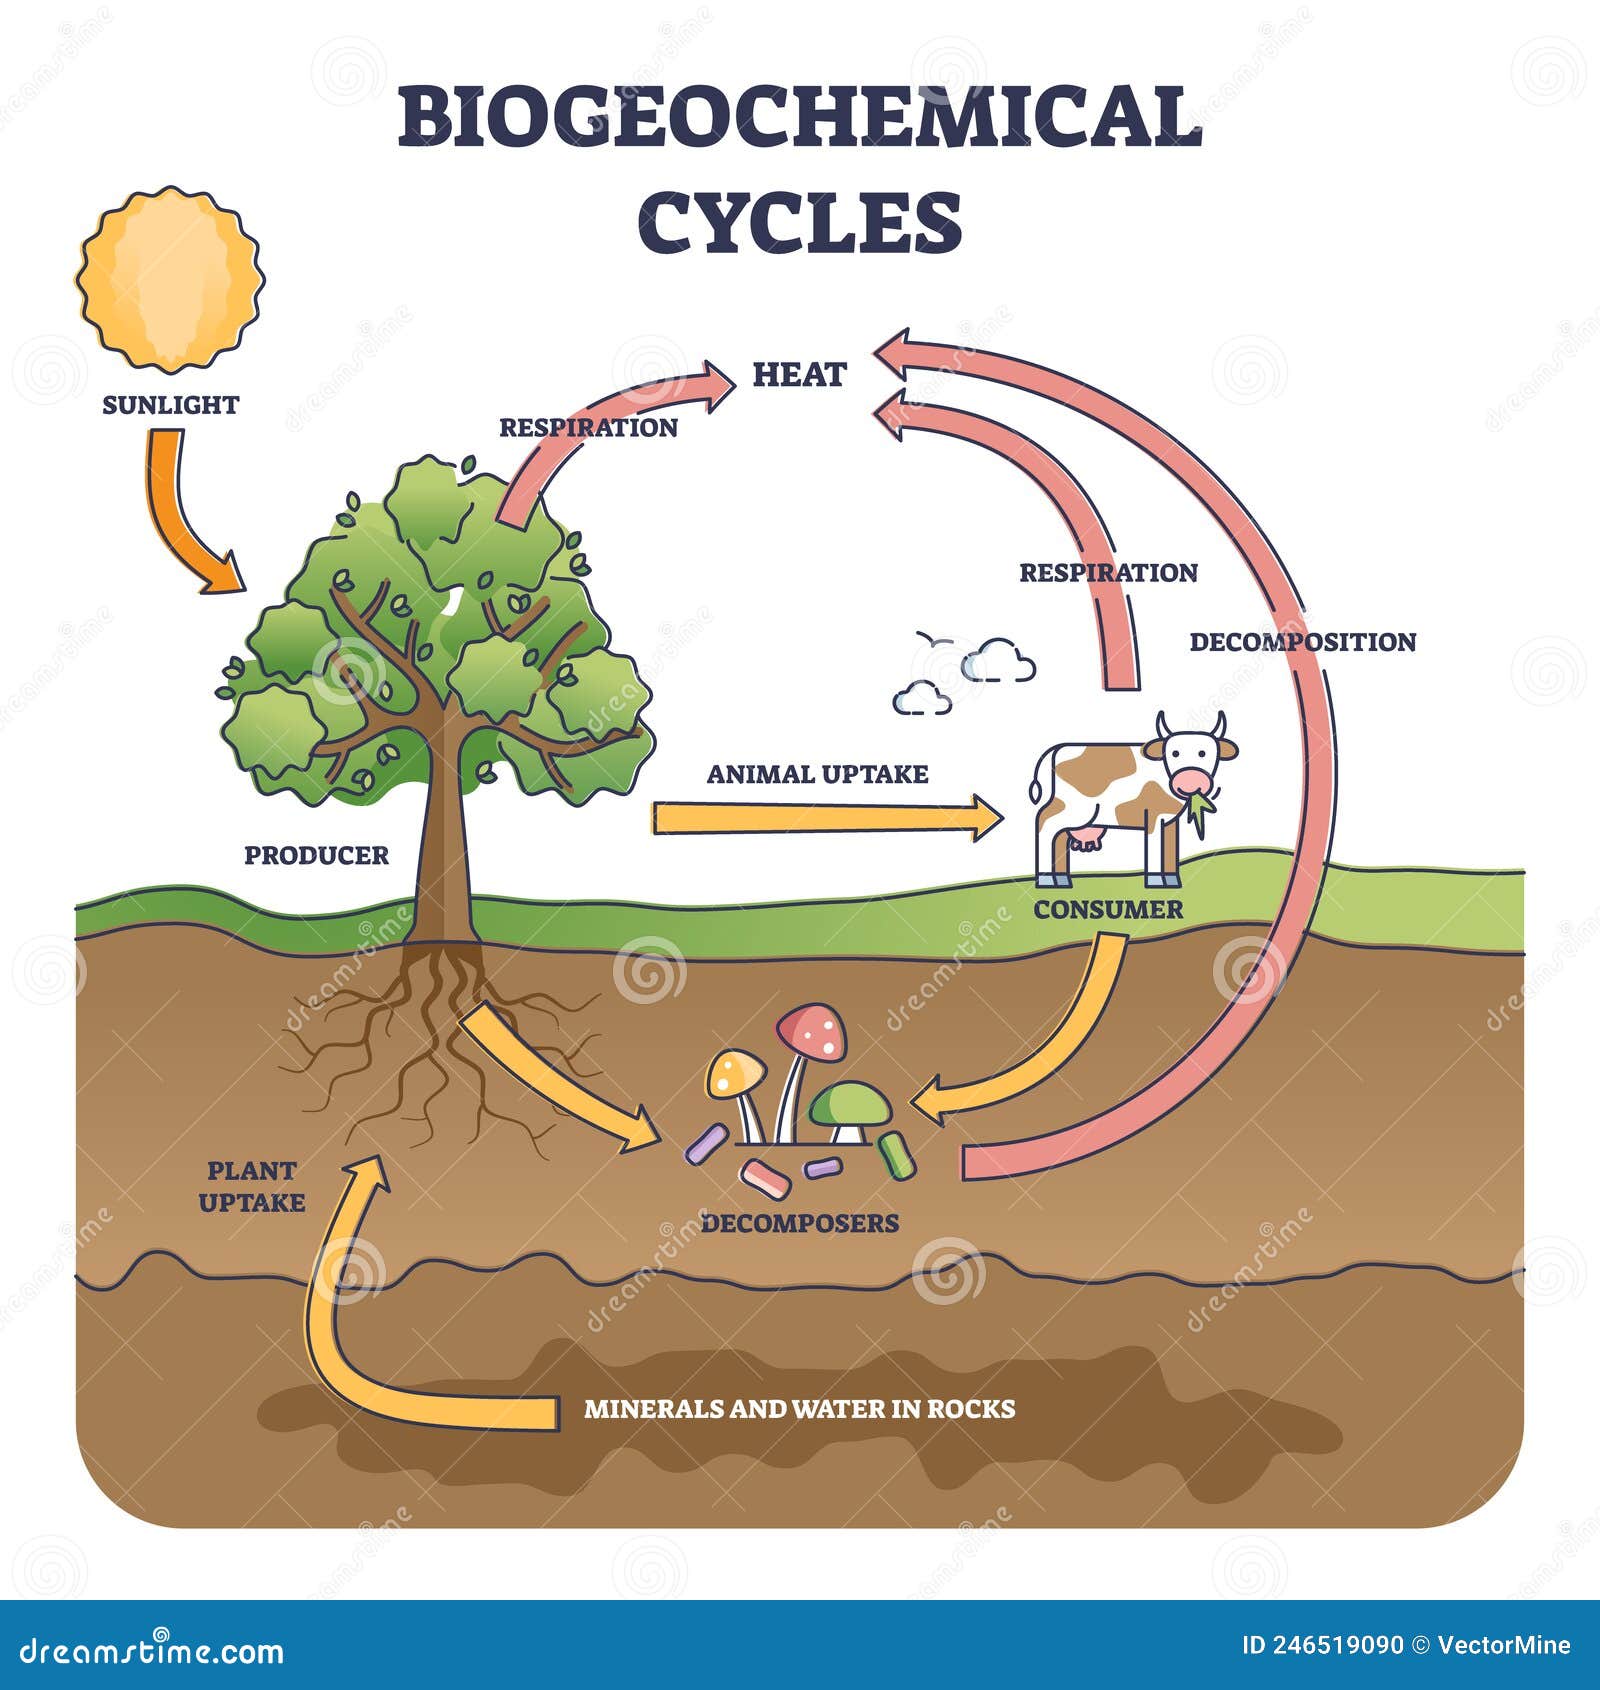 biogeochemical cycle as natural substance circulation pathway outline diagram